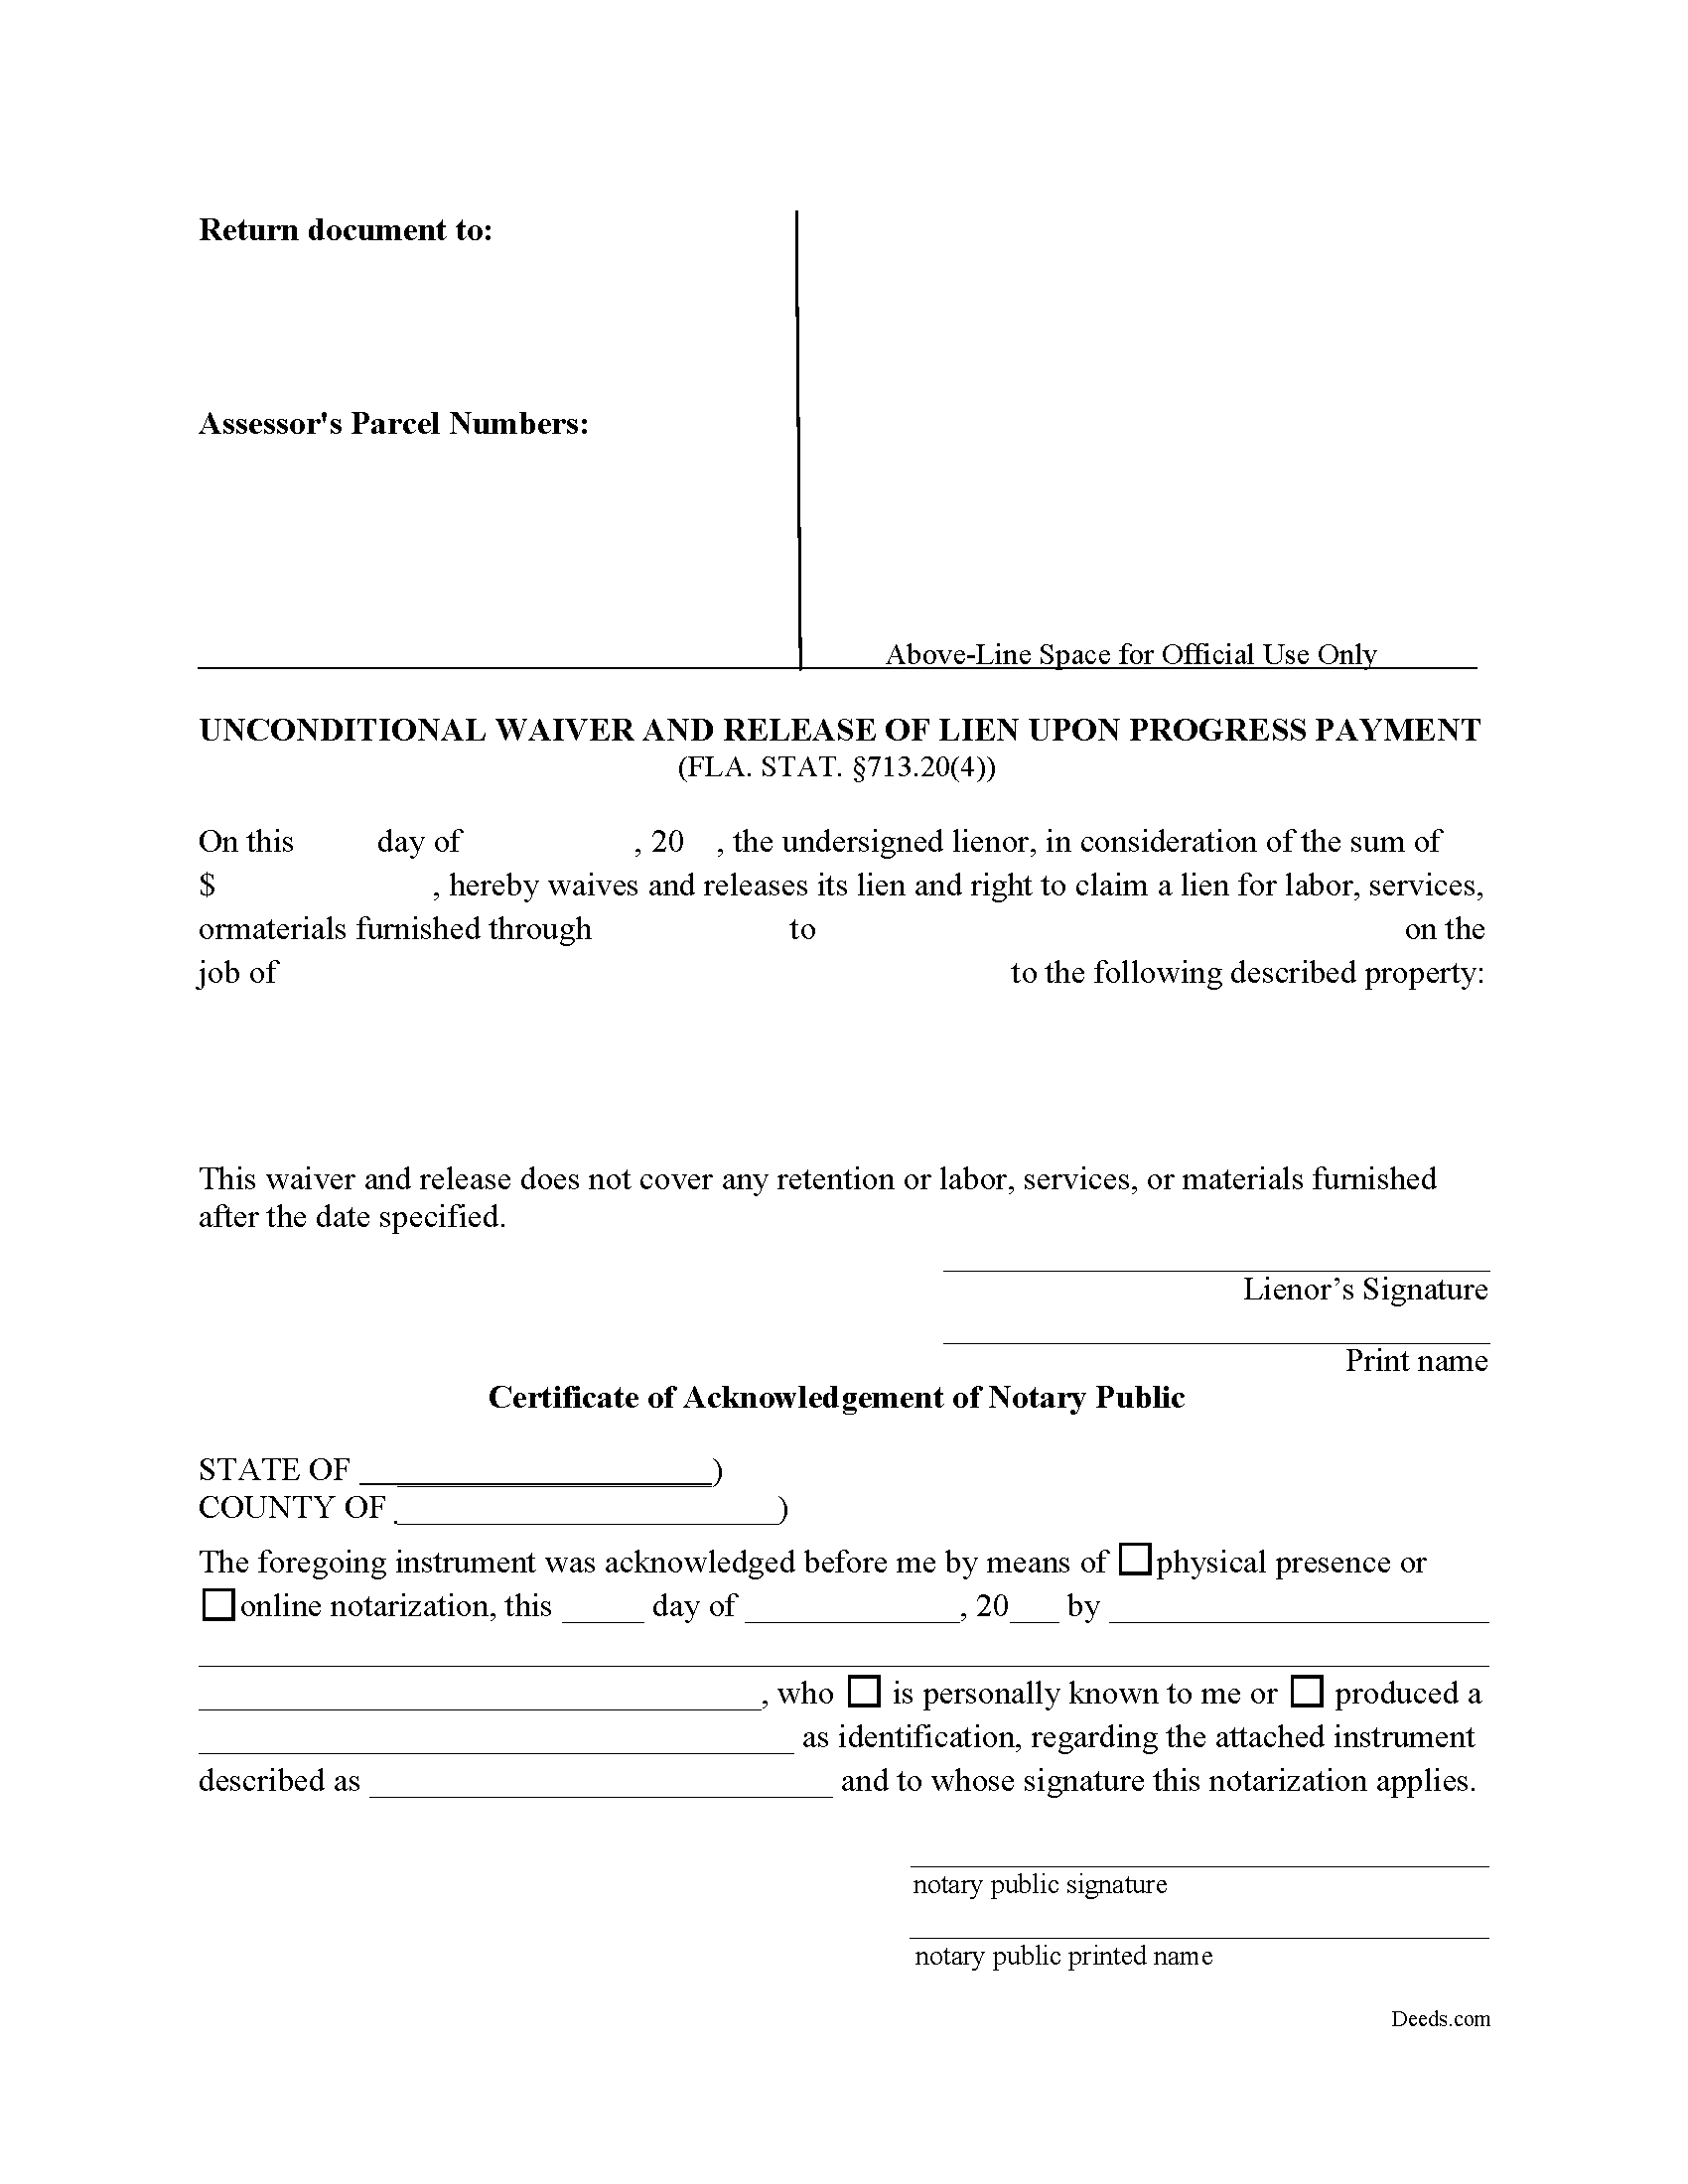 Florida Unconditional Waiver and Release of Lien upon Progress Payment Image